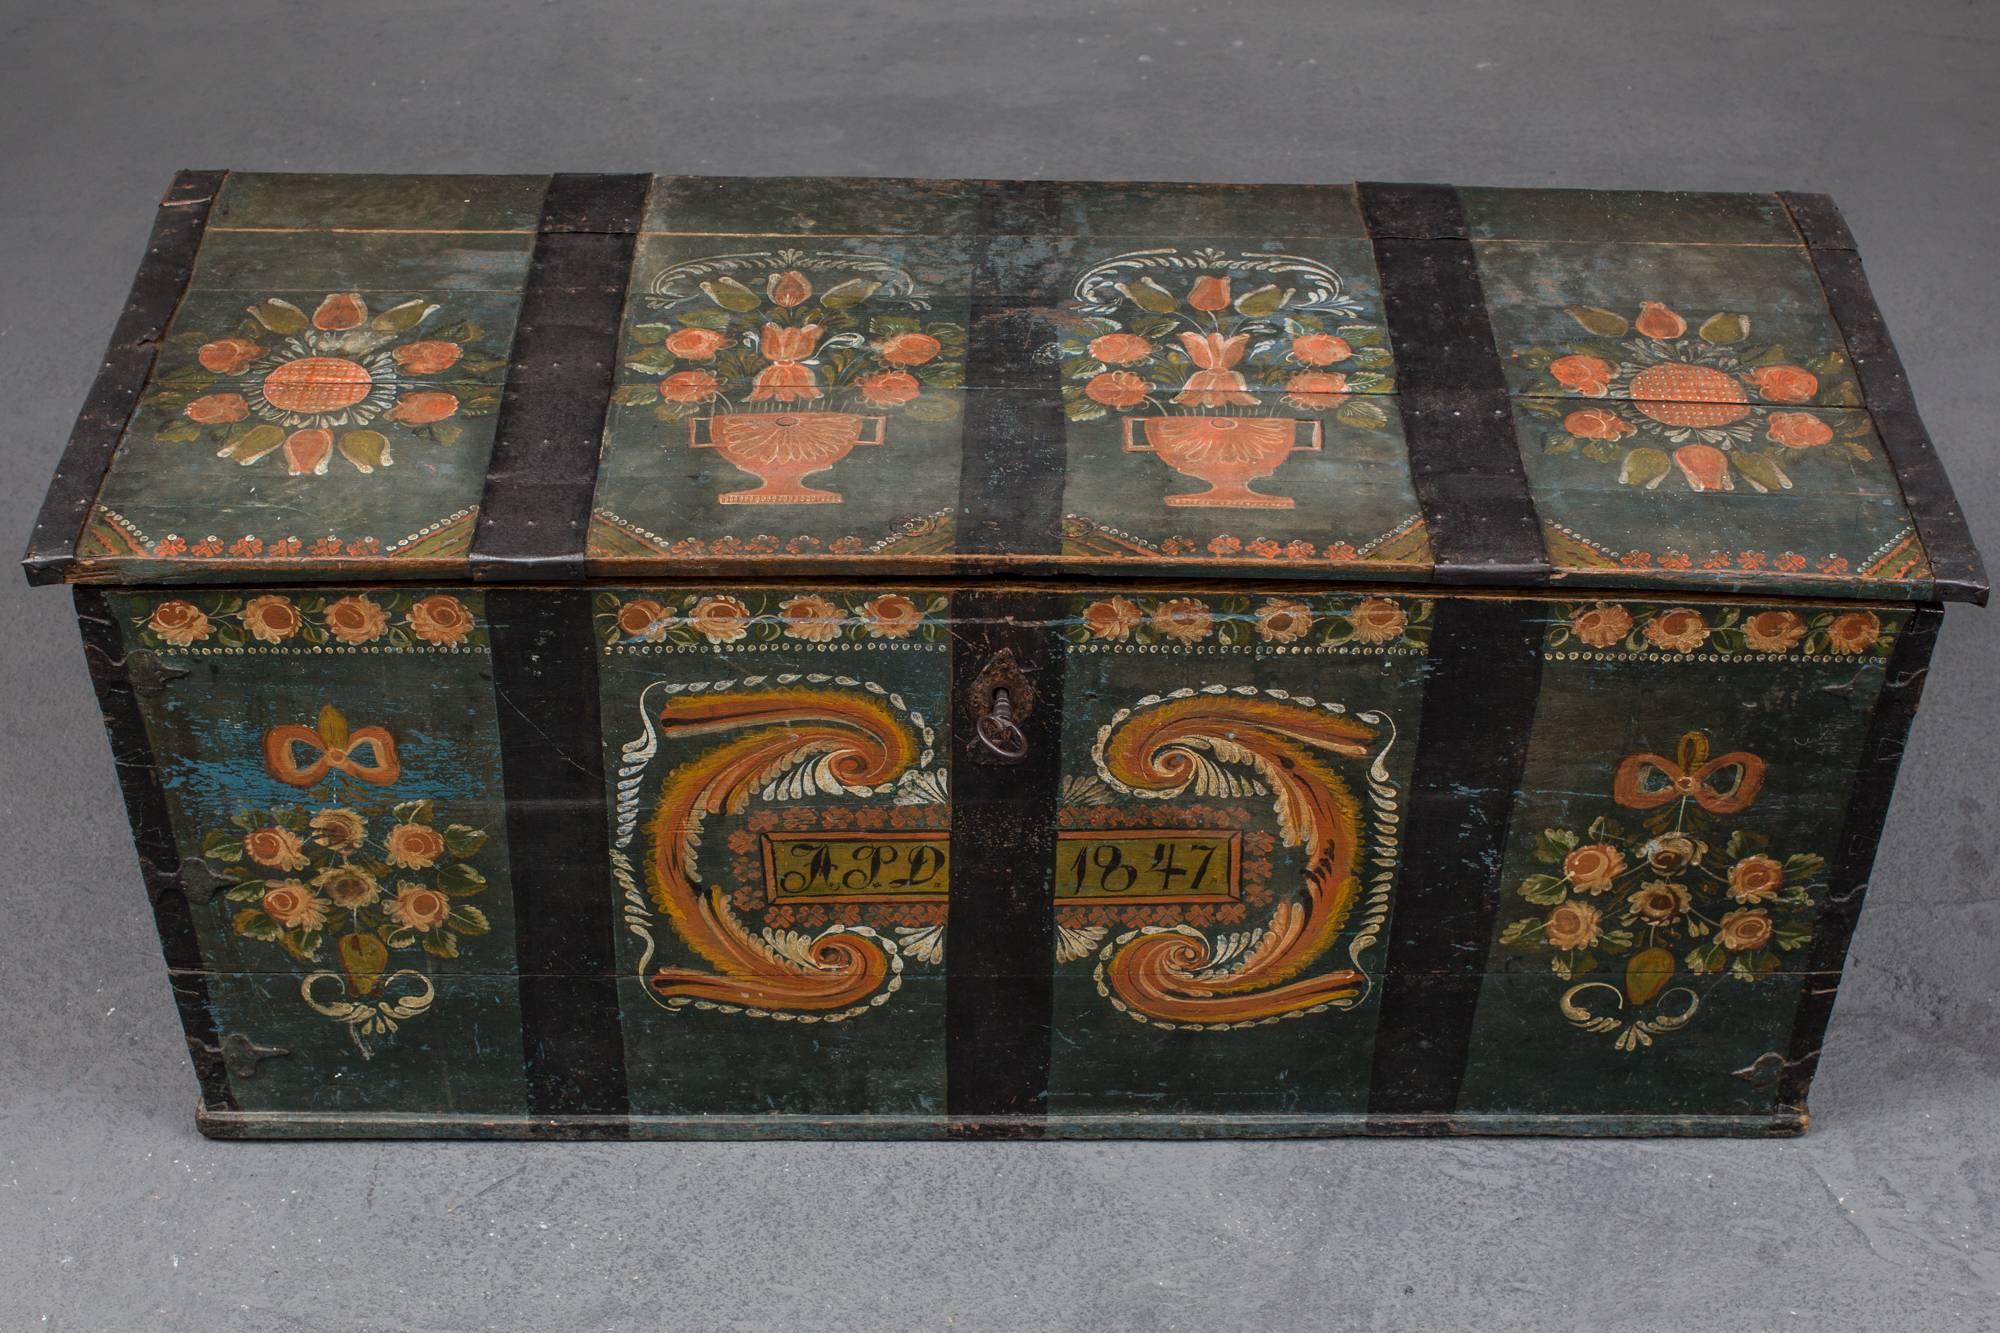 A blanket chest in allmoge made in the southern part of Sweden, 19th century, 1847. Original painting and iron banding. Dimensions: H: 25.5